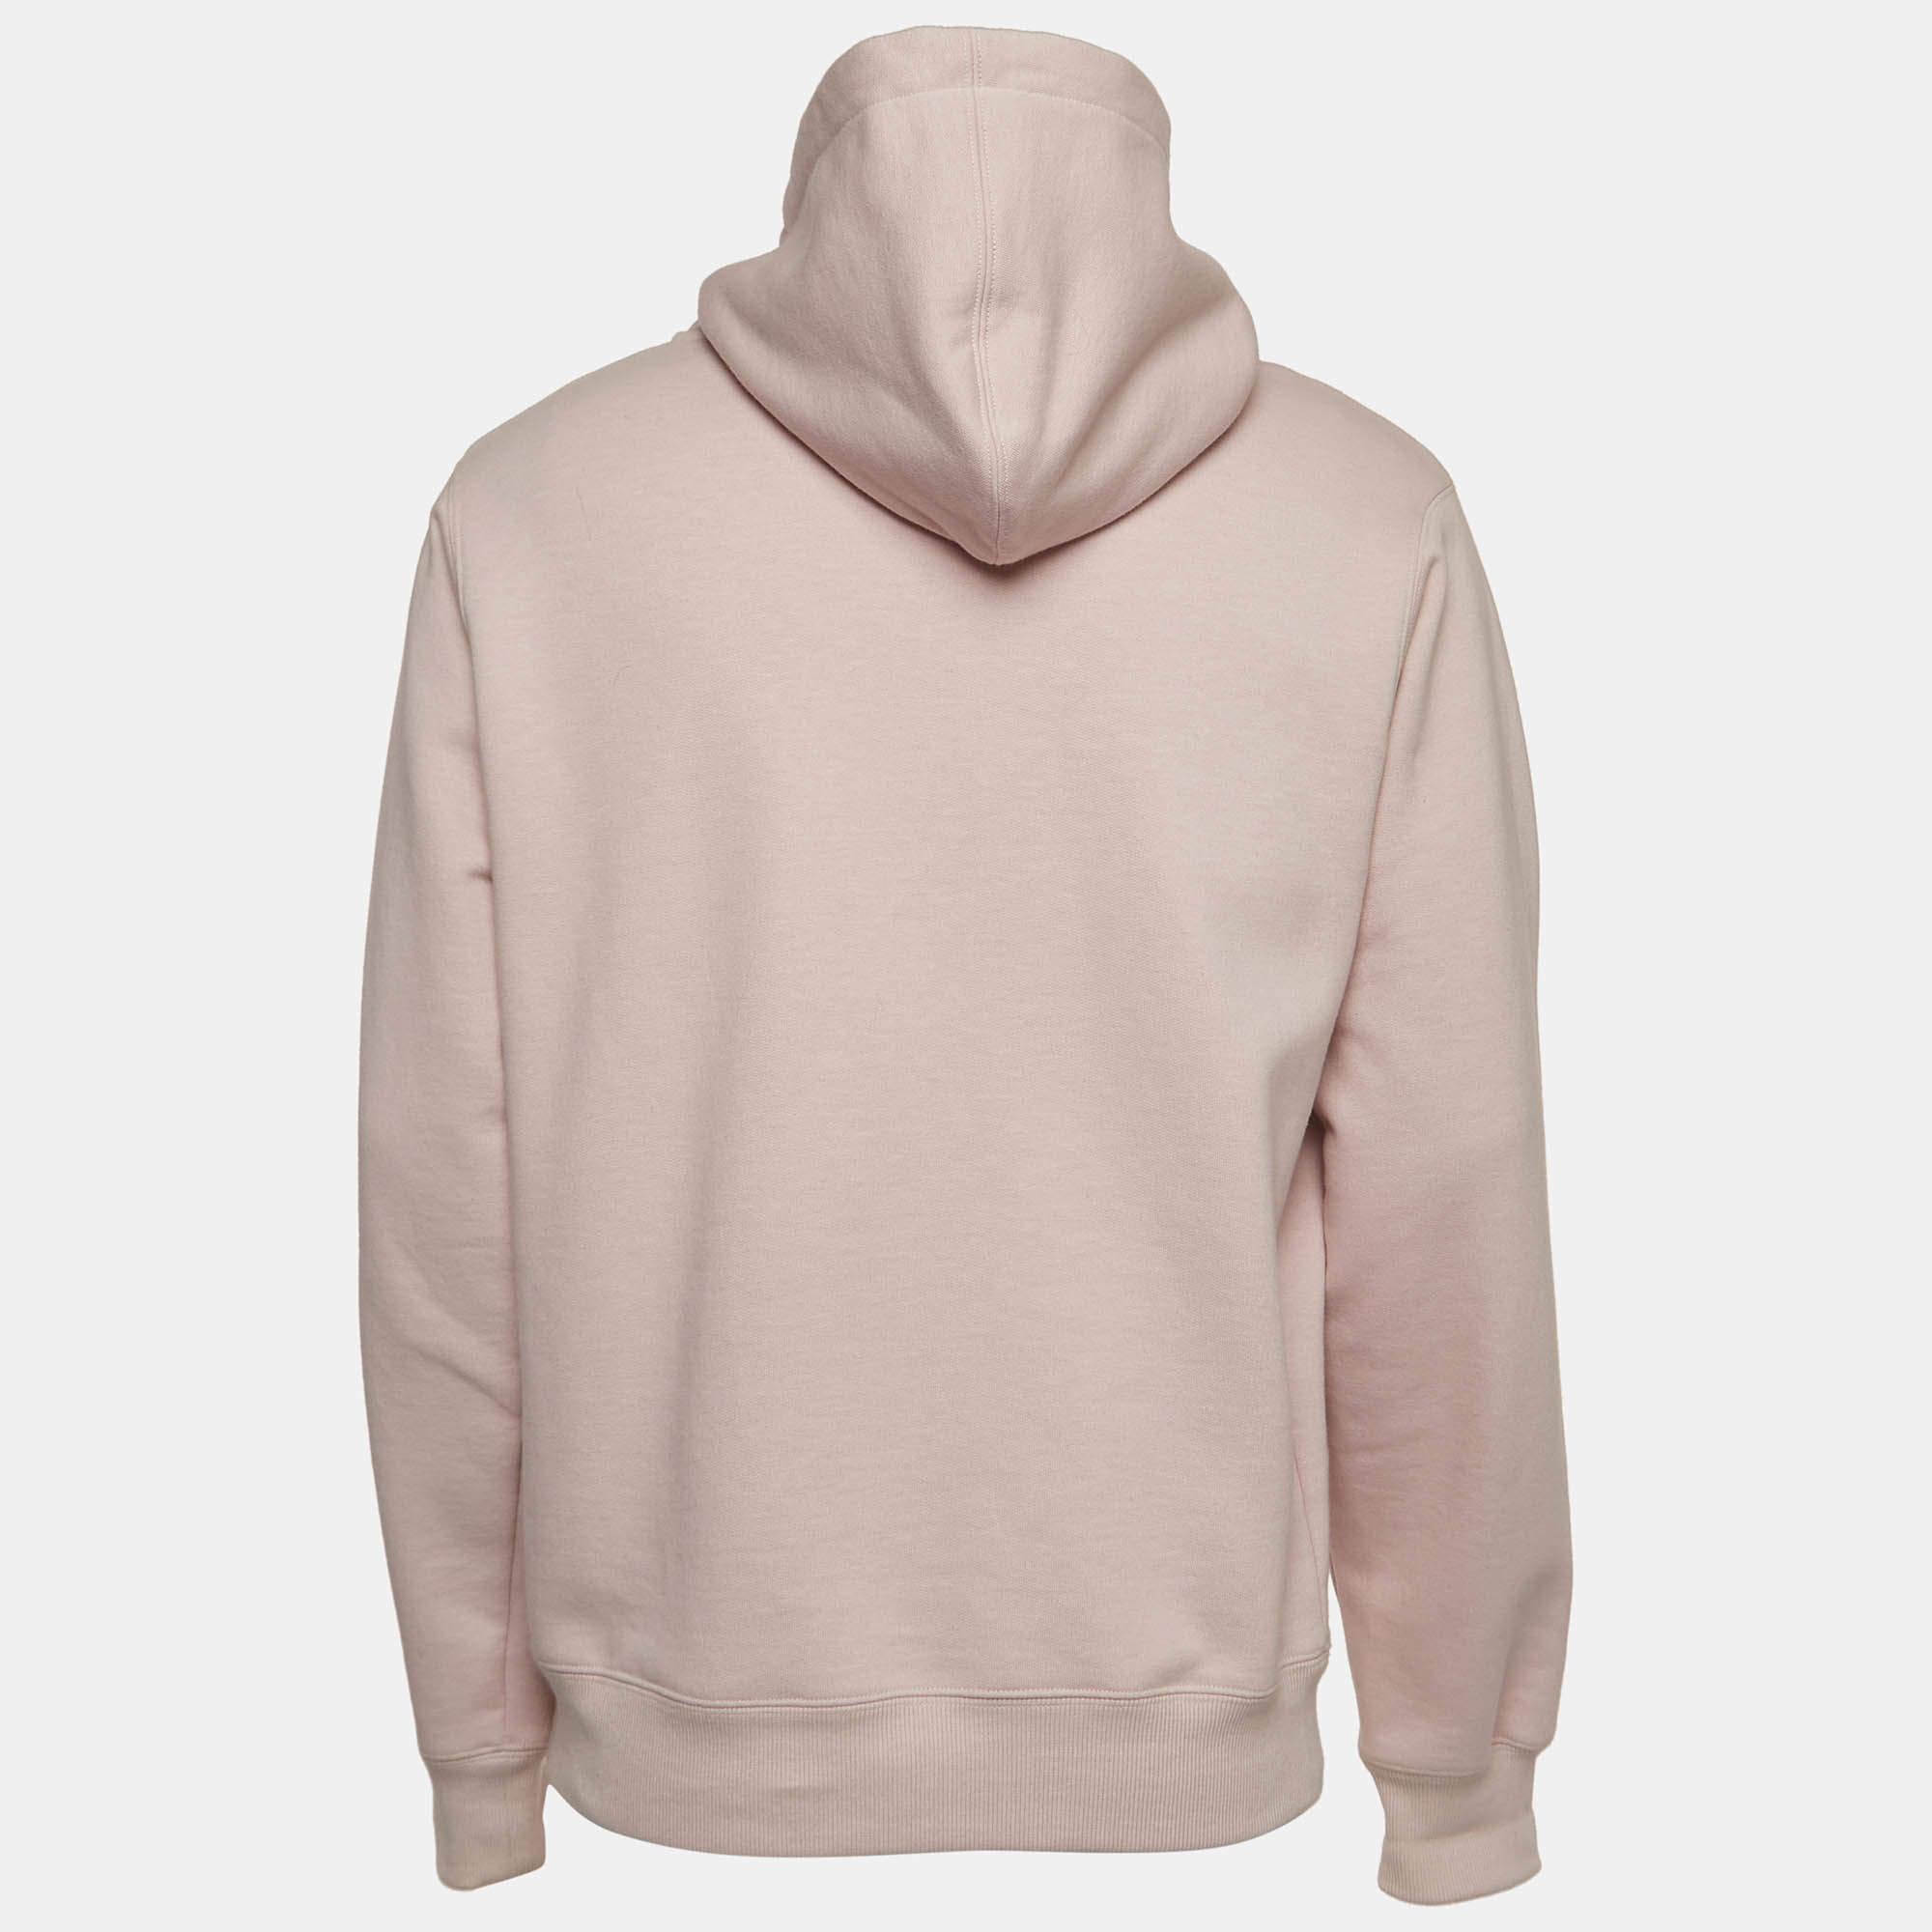 This Dior X Alex Foxton hoodie is all about sporting a classy and comfy style. It is tailored from soft fabric, which is highlighted with signature accents.

